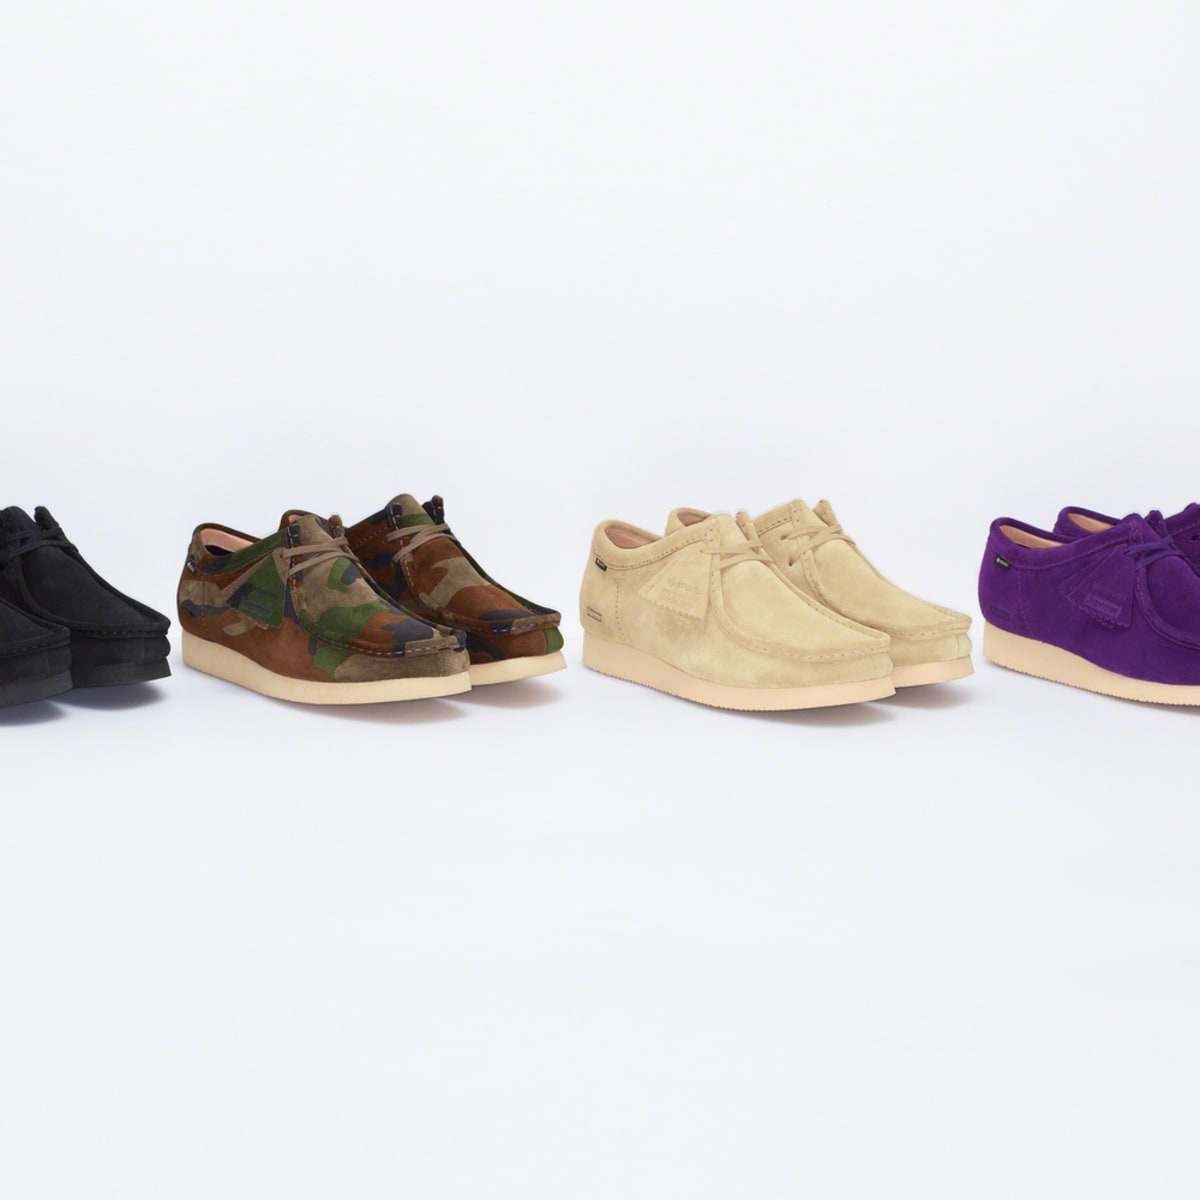 Supreme and Clarks weatherizes the Wallabee for their latest 